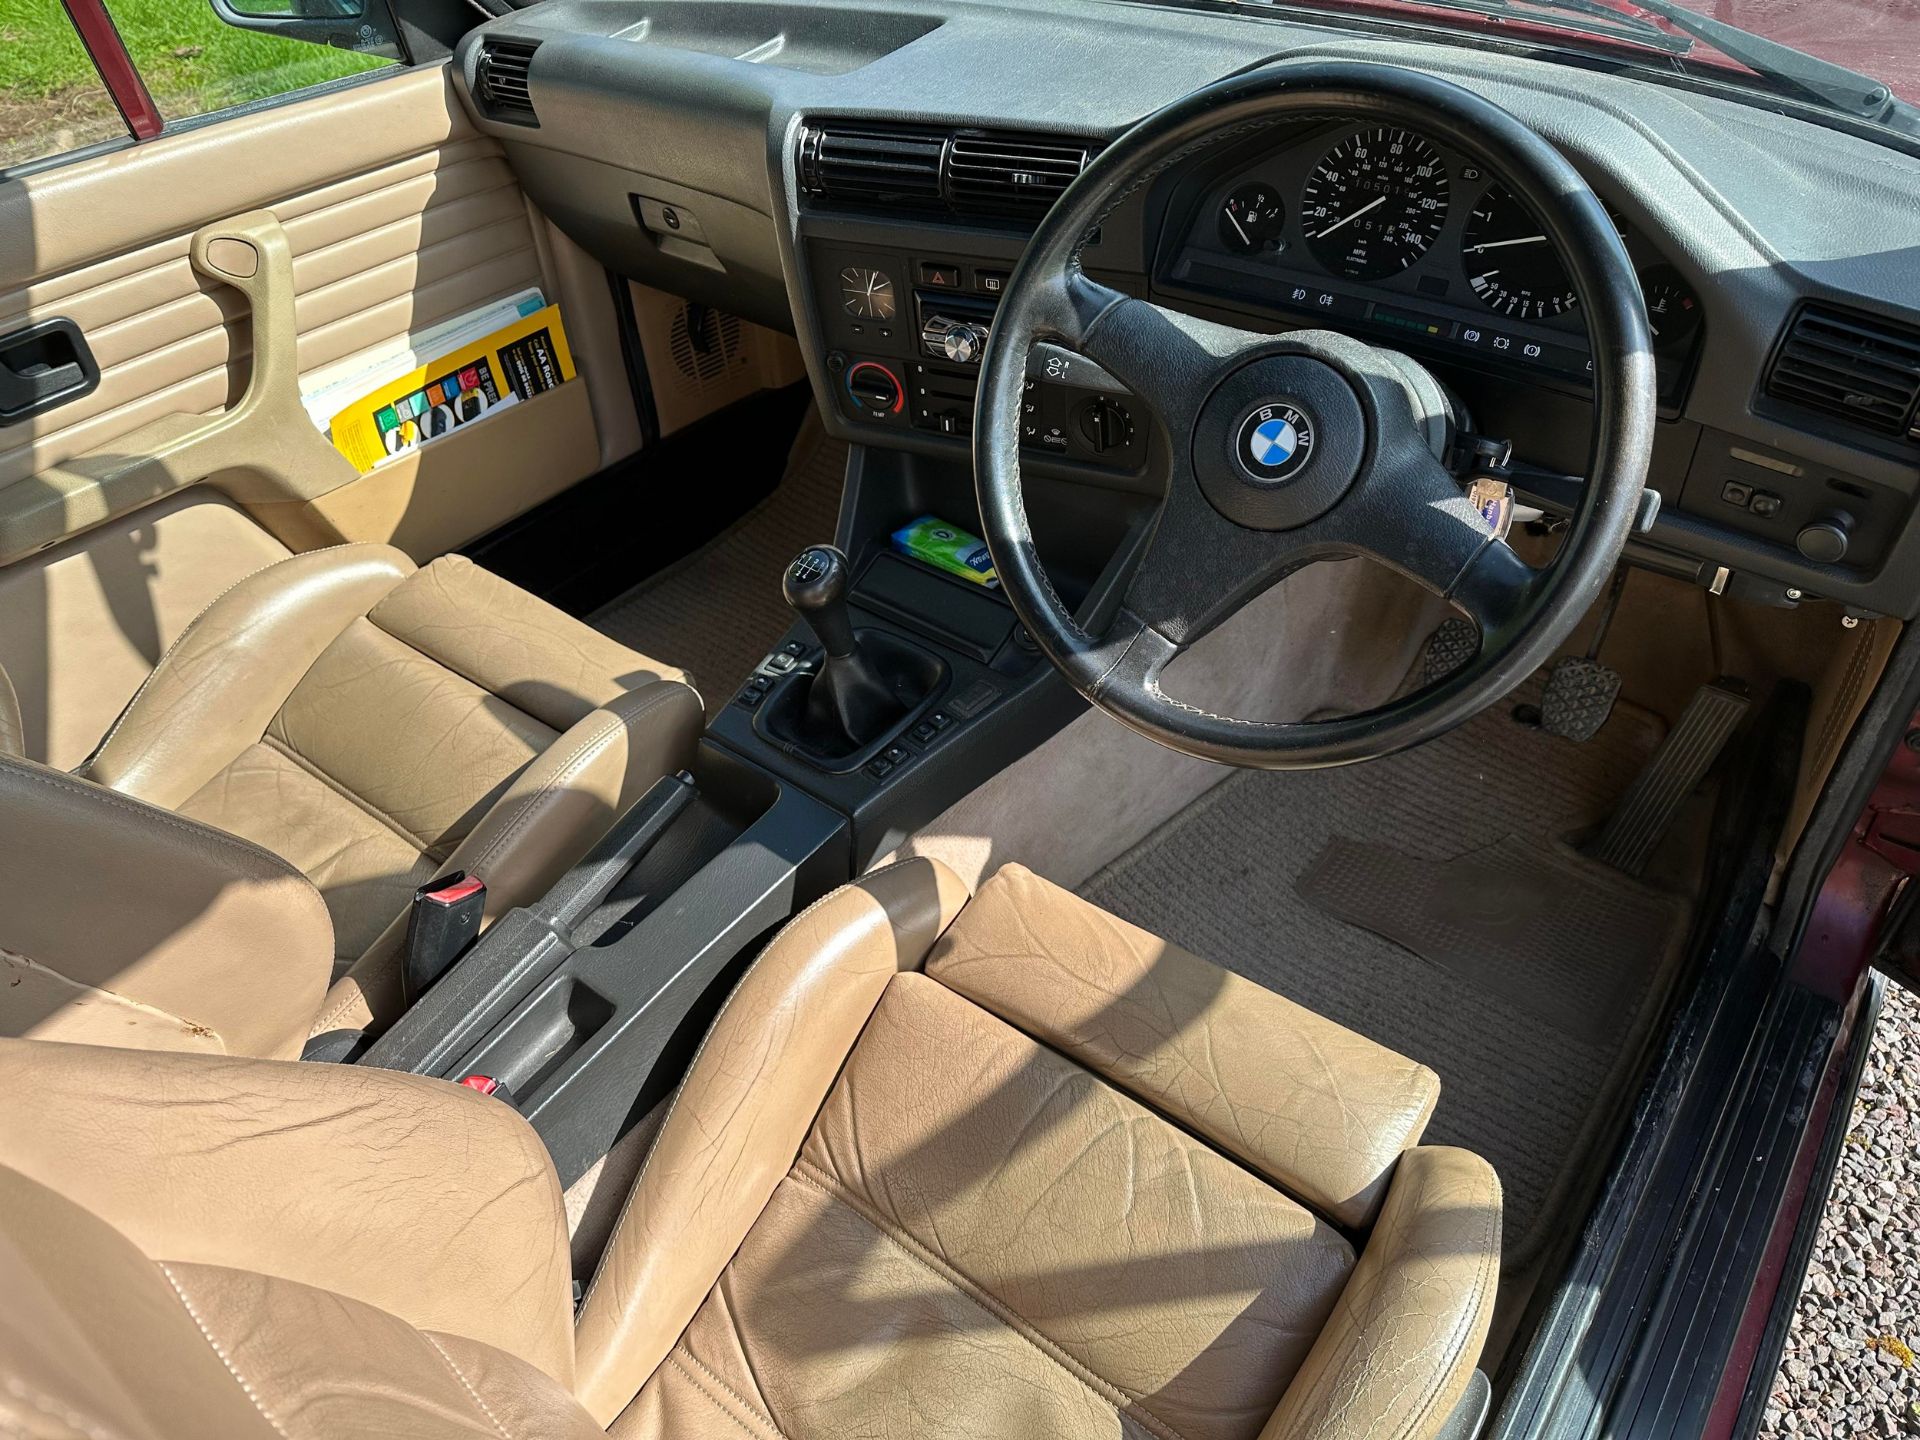 1990 BMW 325i Convertible Registration number G171 PYC Chassis number WBABB12070LB95832 Engine - Image 64 of 67